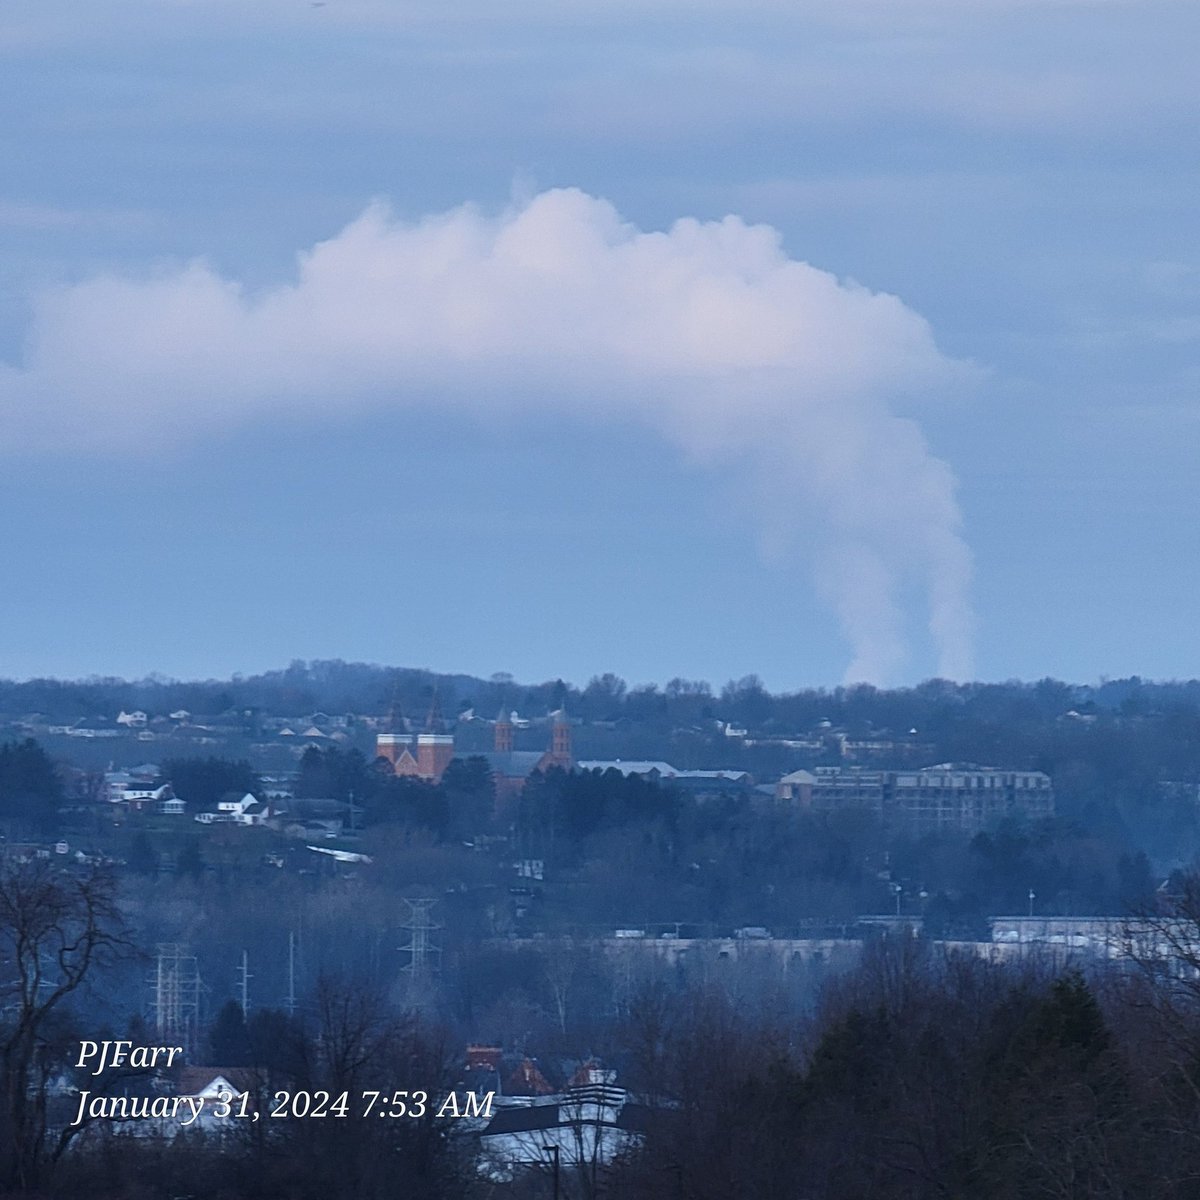 What ever happened to clean water, clean air, & clean food?
I am an observer. I love nature. I walk a bit. Today, I noticed something unusual. Two venting stacks of steam? Not sure. I know it isn't Homer City, nor New Florence power plants. What was it? Anyone?
#cleanairmatters